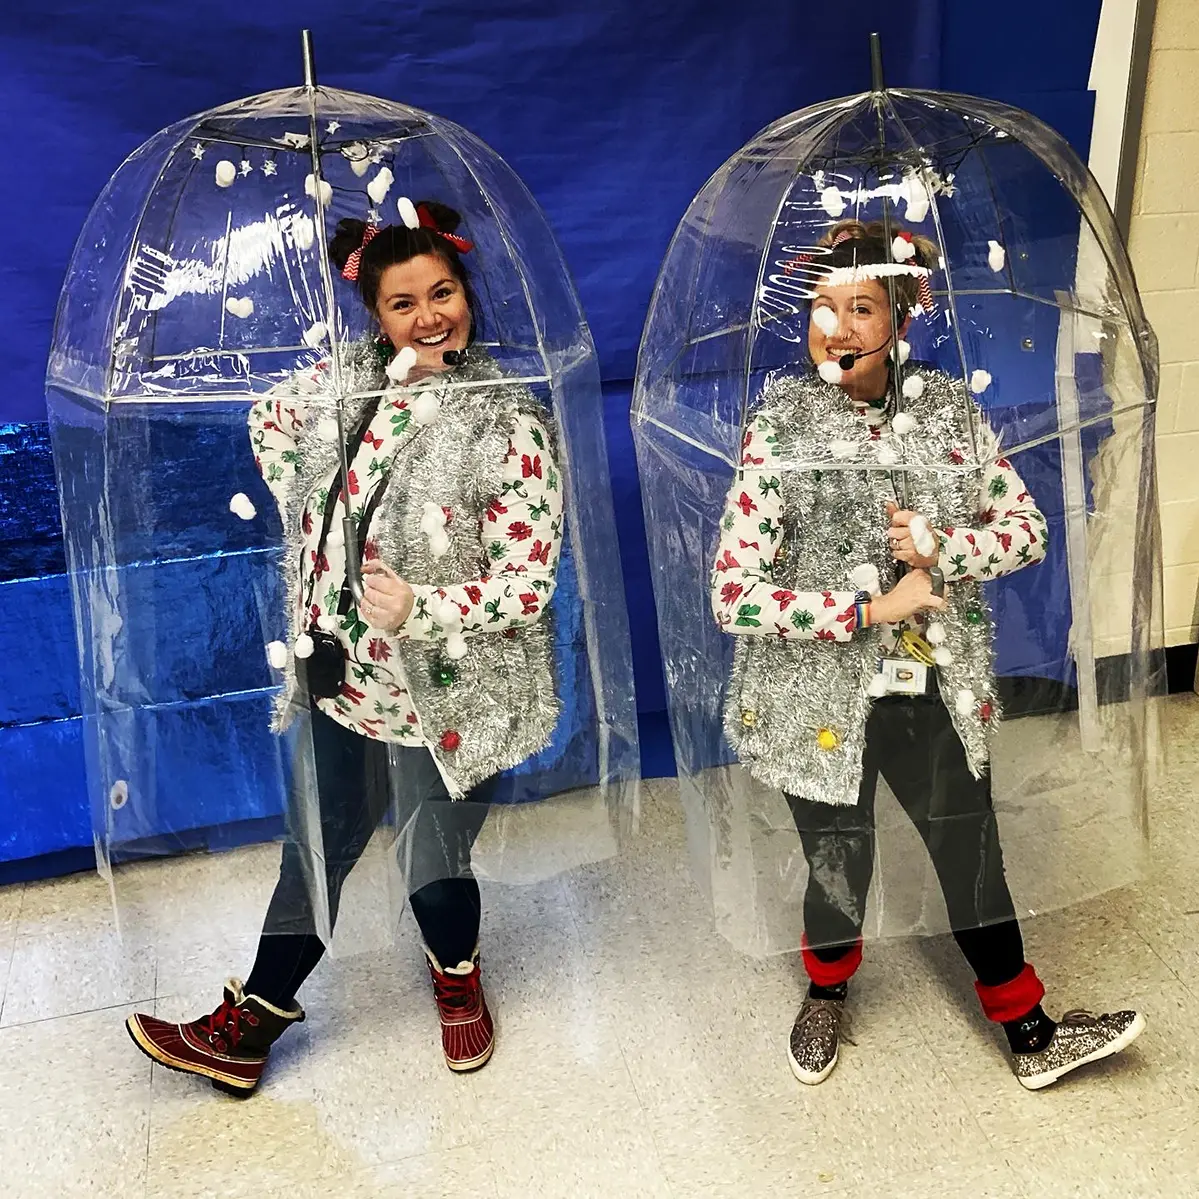 Two women wear shiny costumes and stand within clear plastic bubbles made from umbrellas